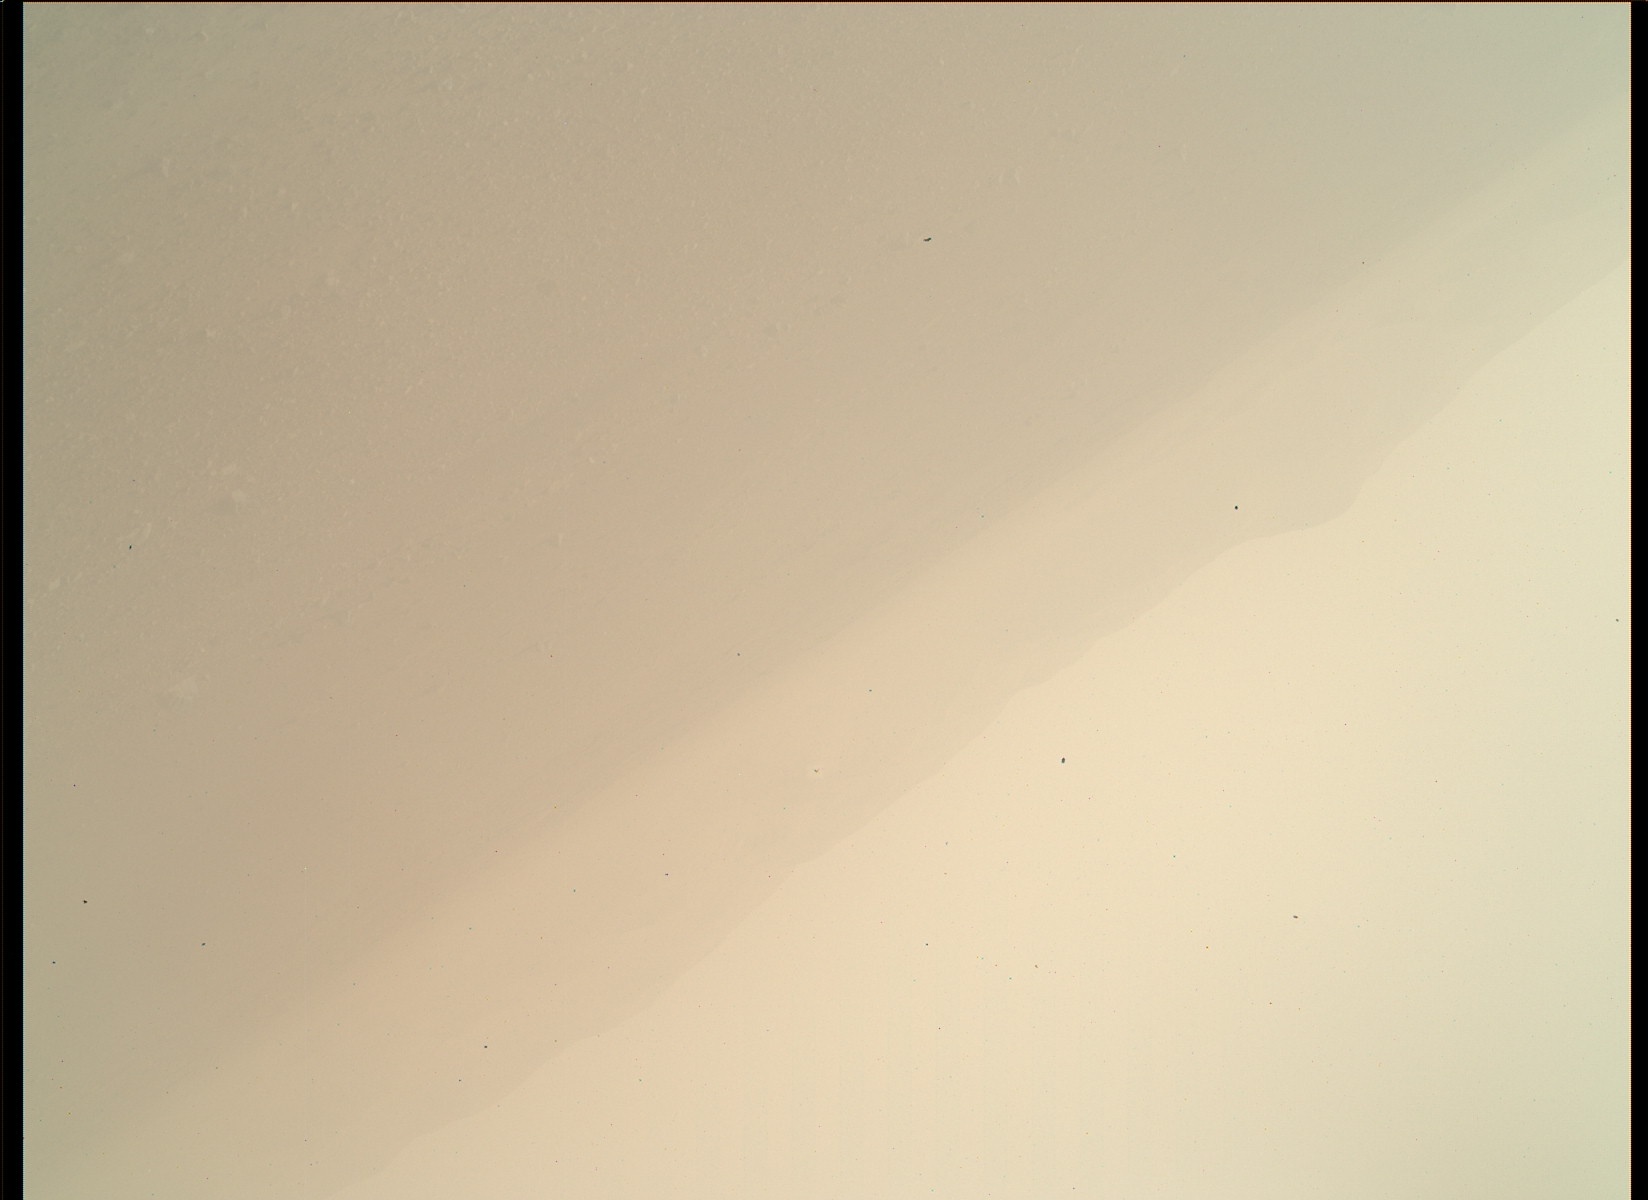 Nasa's Mars rover Curiosity acquired this image using its Mars Hand Lens Imager (MAHLI) on Sol 10